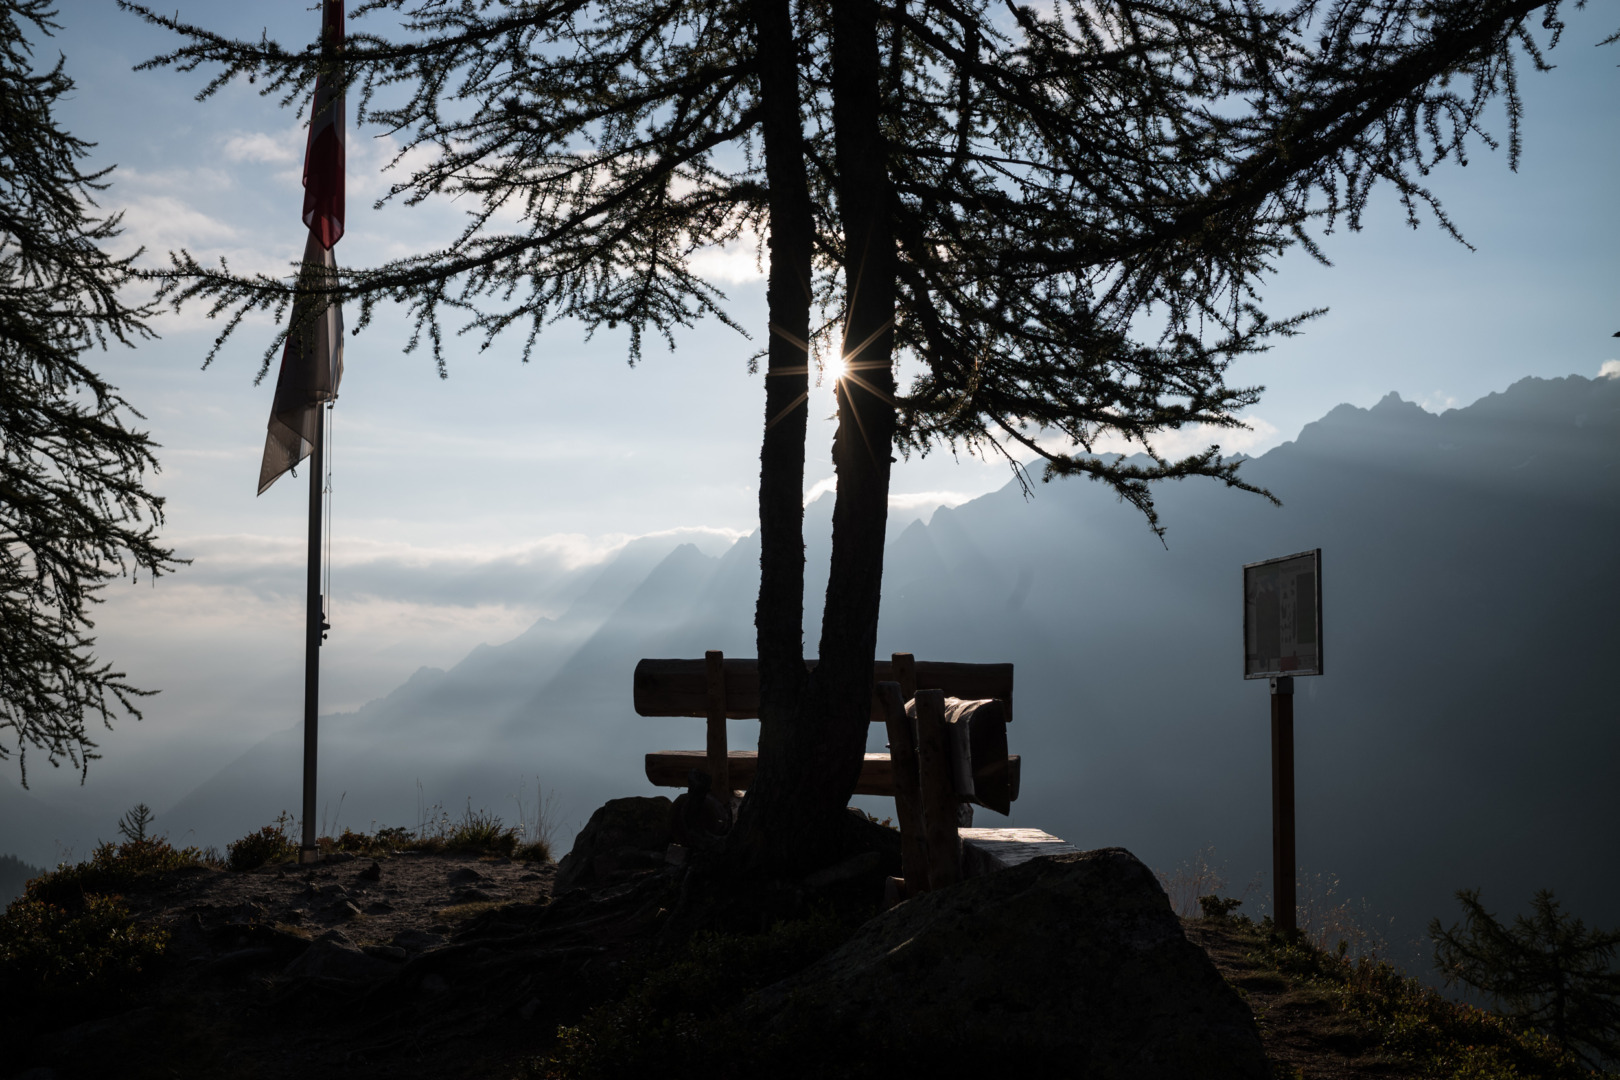 Rest and be thankful (for the privilege to indulge yourself with things like lenses for your Leica). Morning near Capanna Piansecco, high above Val Bedretto, Switzerland. Zeiss Distagon 35/1.4 on Leica M10. 1/2000 sec, f/2.8 ca., ISO 200.